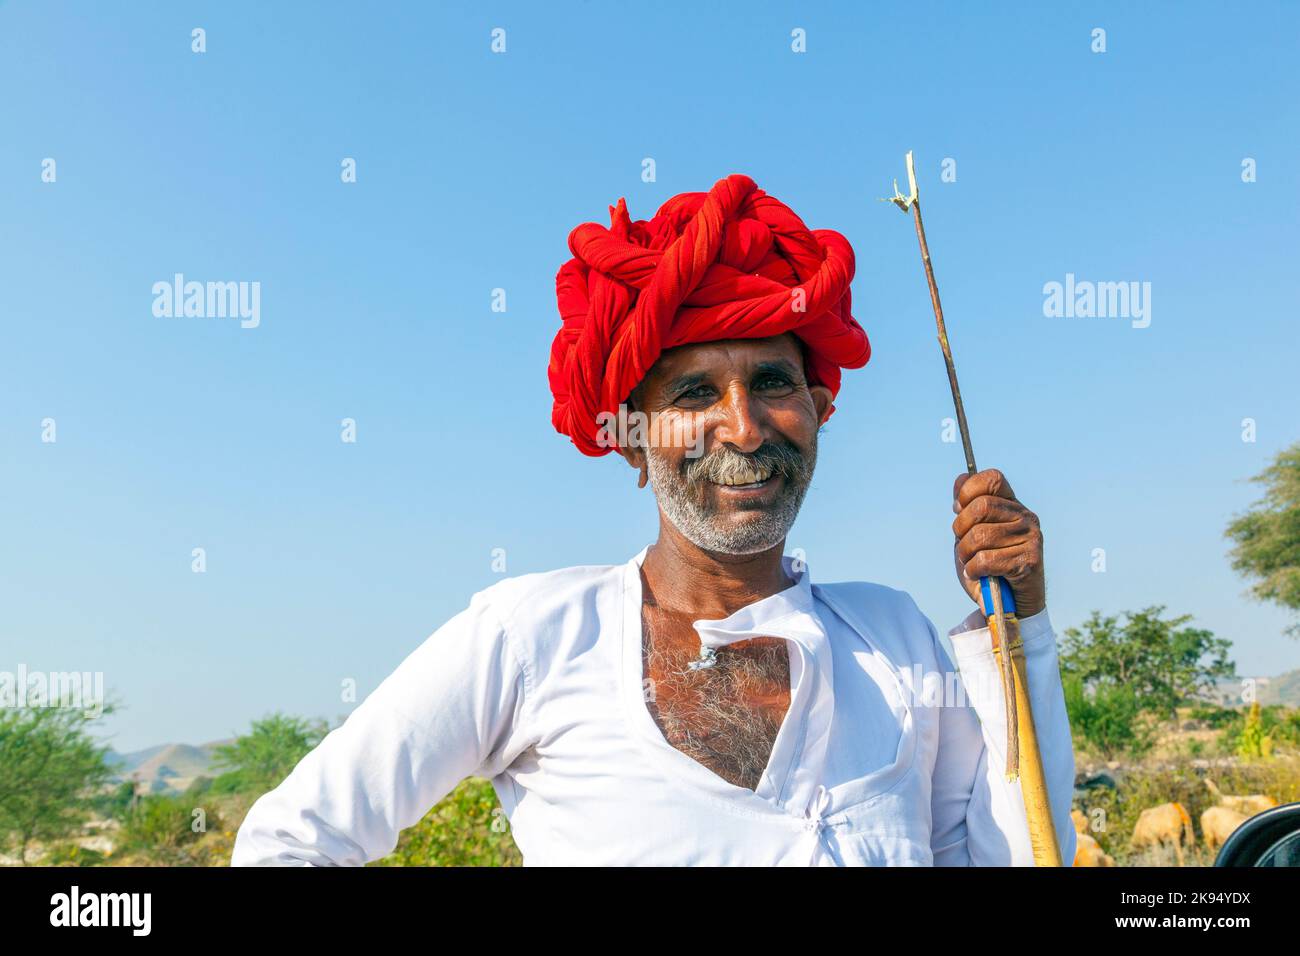 PUSHKAR, INDIA - OCTOBER 22: A Rajasthani tribal man wearing traditional colorful turban and loves to pose  at the annual Pushkar Cattle Fair on Octob Stock Photo